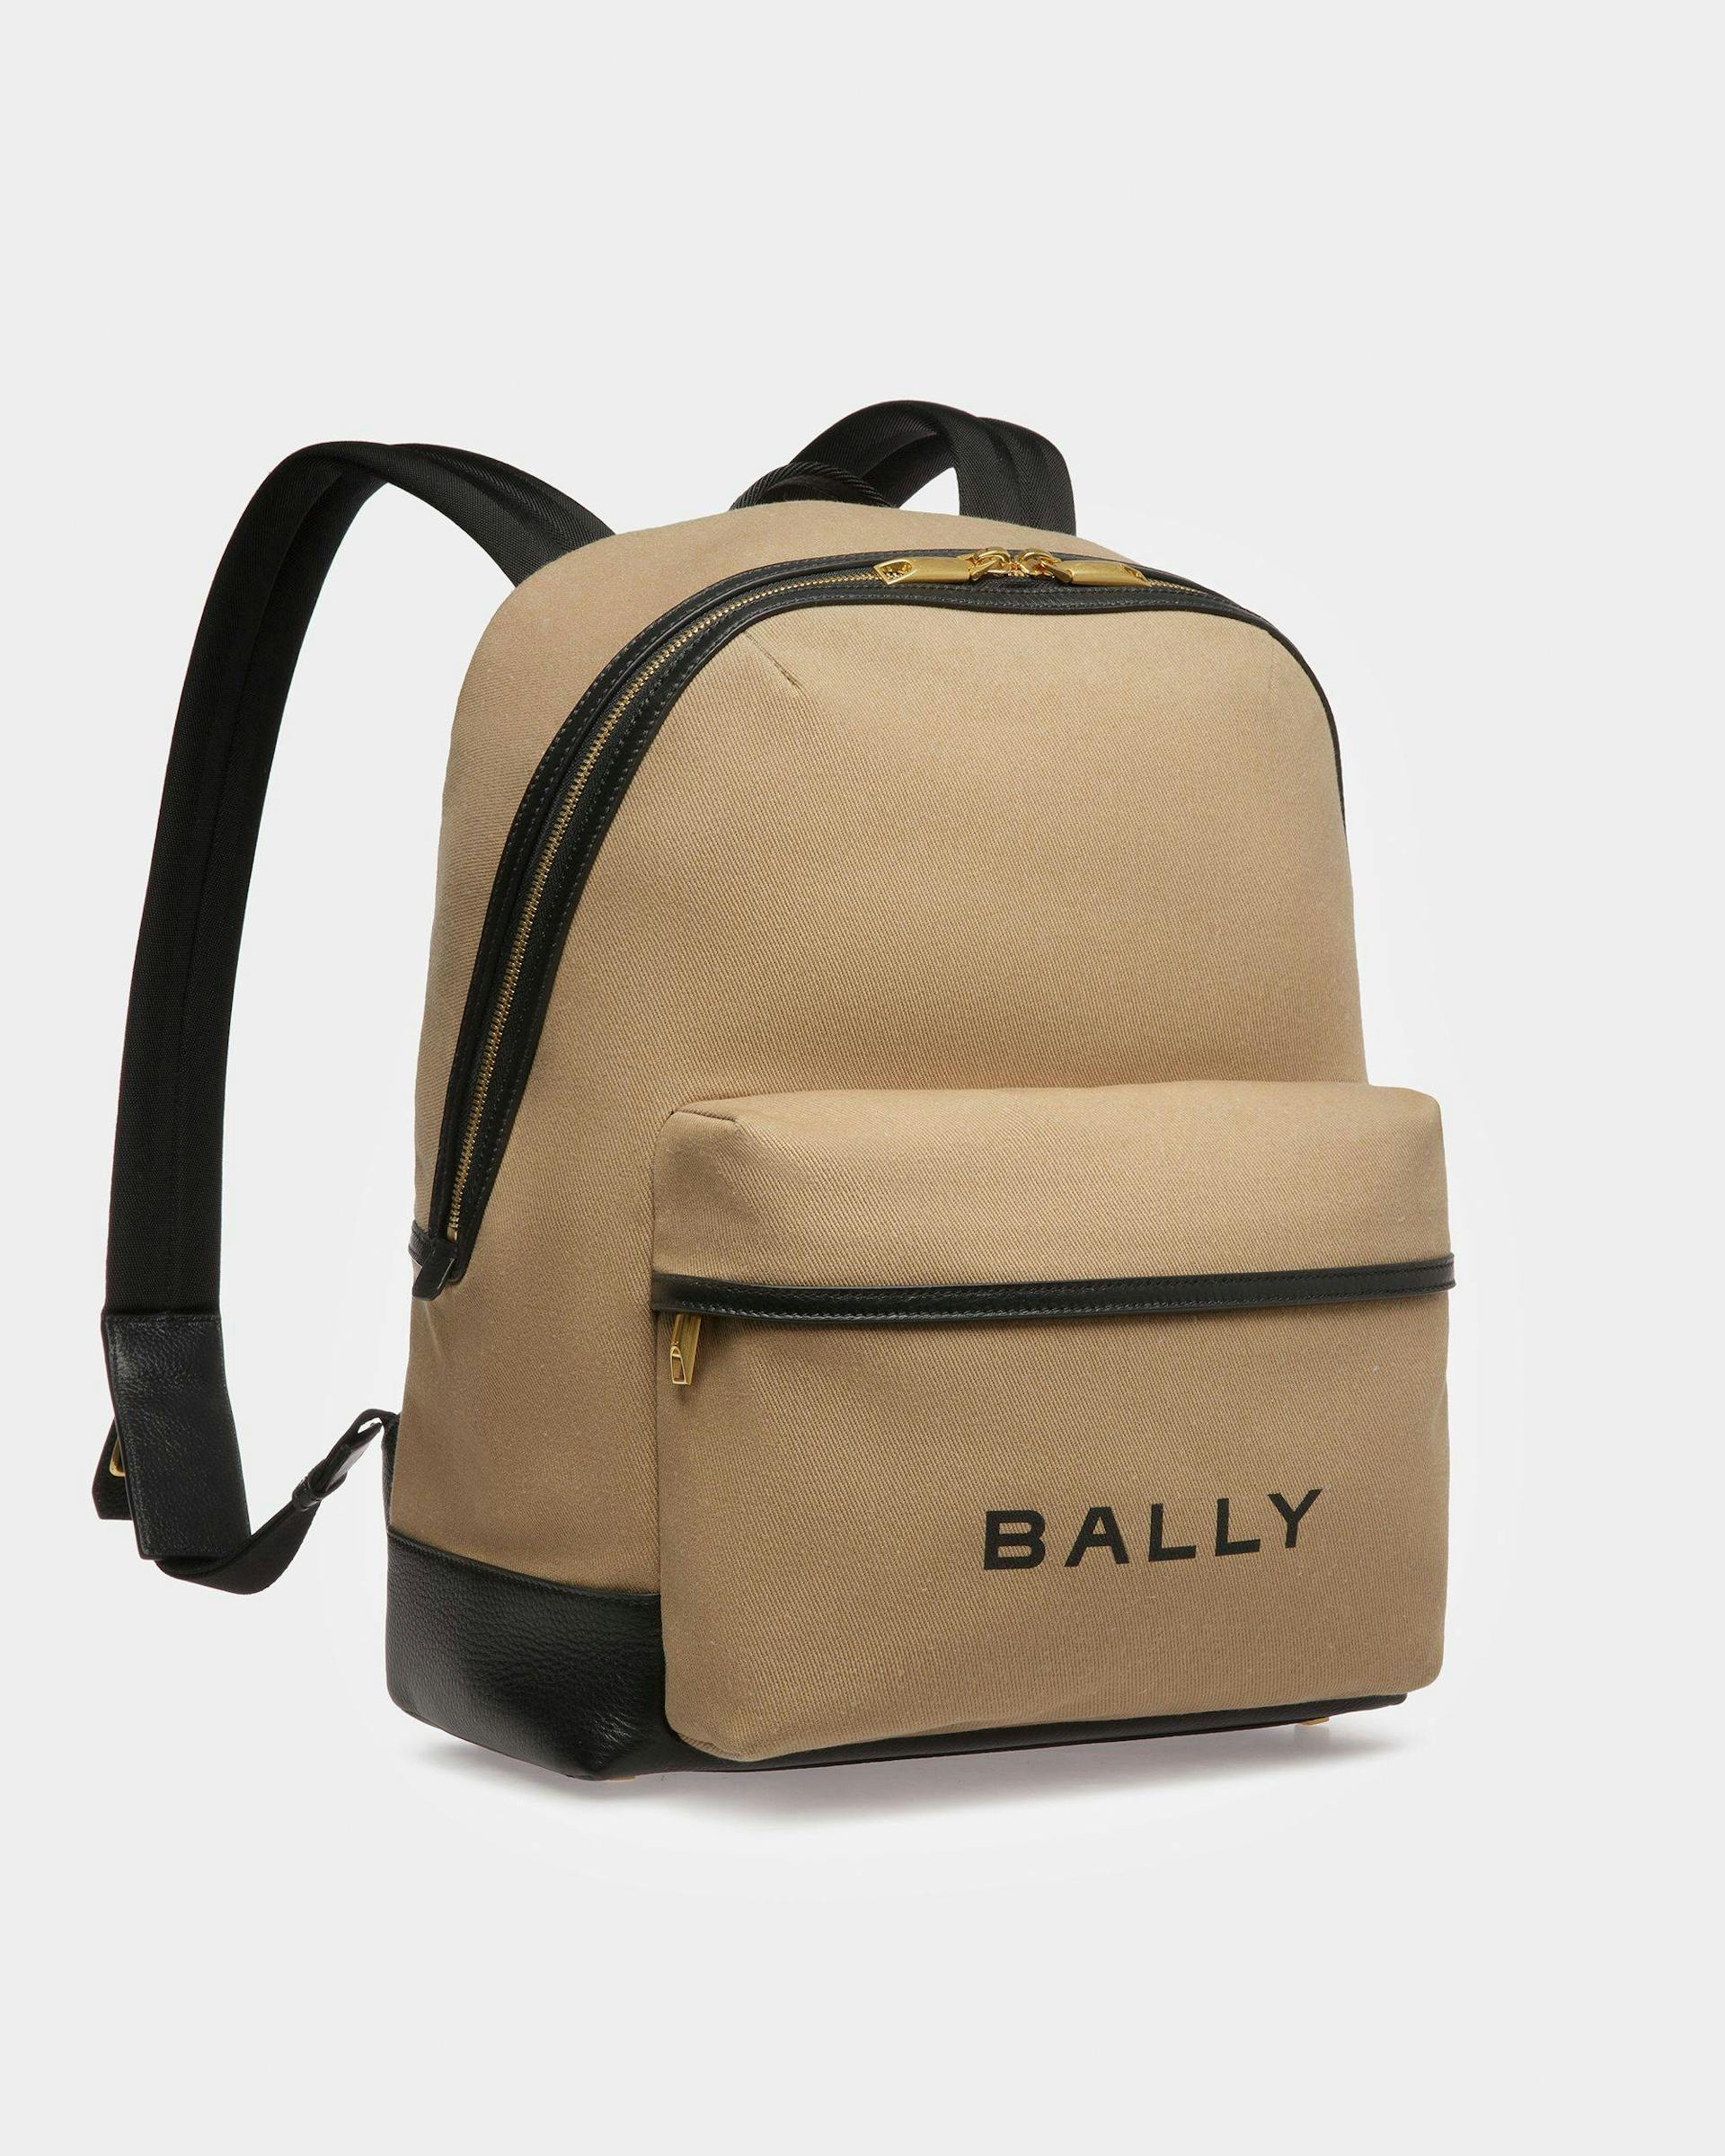 Men's Bar Backpack In Sand And Black Fabric And Leather | Bally | Still Life 3/4 Front